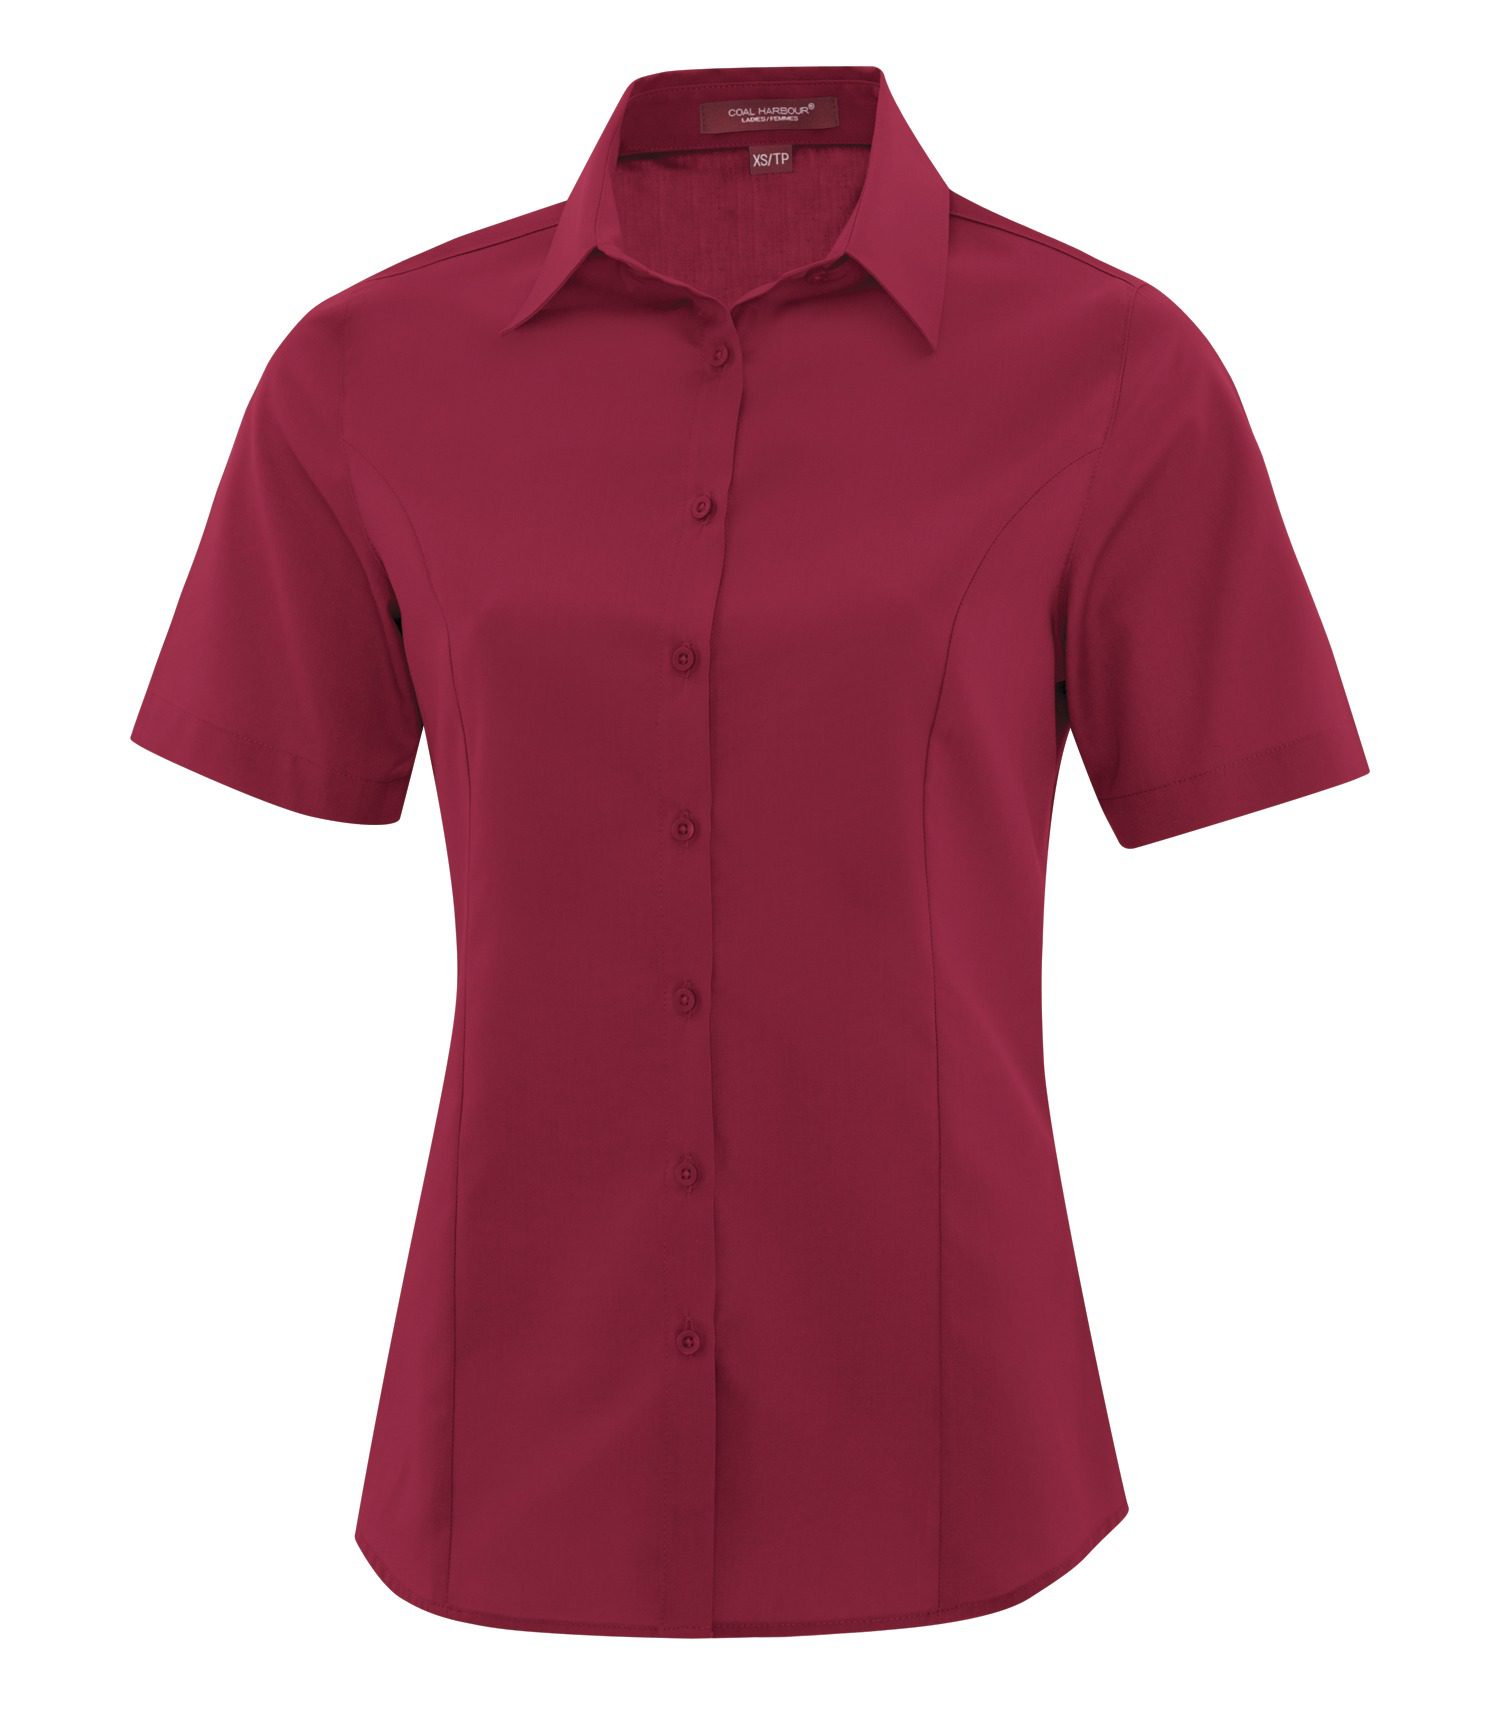 COAL HARBOUR® EVERYDAY SHORT SLEEVE LADIES' WOVEN SHIRT #L6021 Rich Red